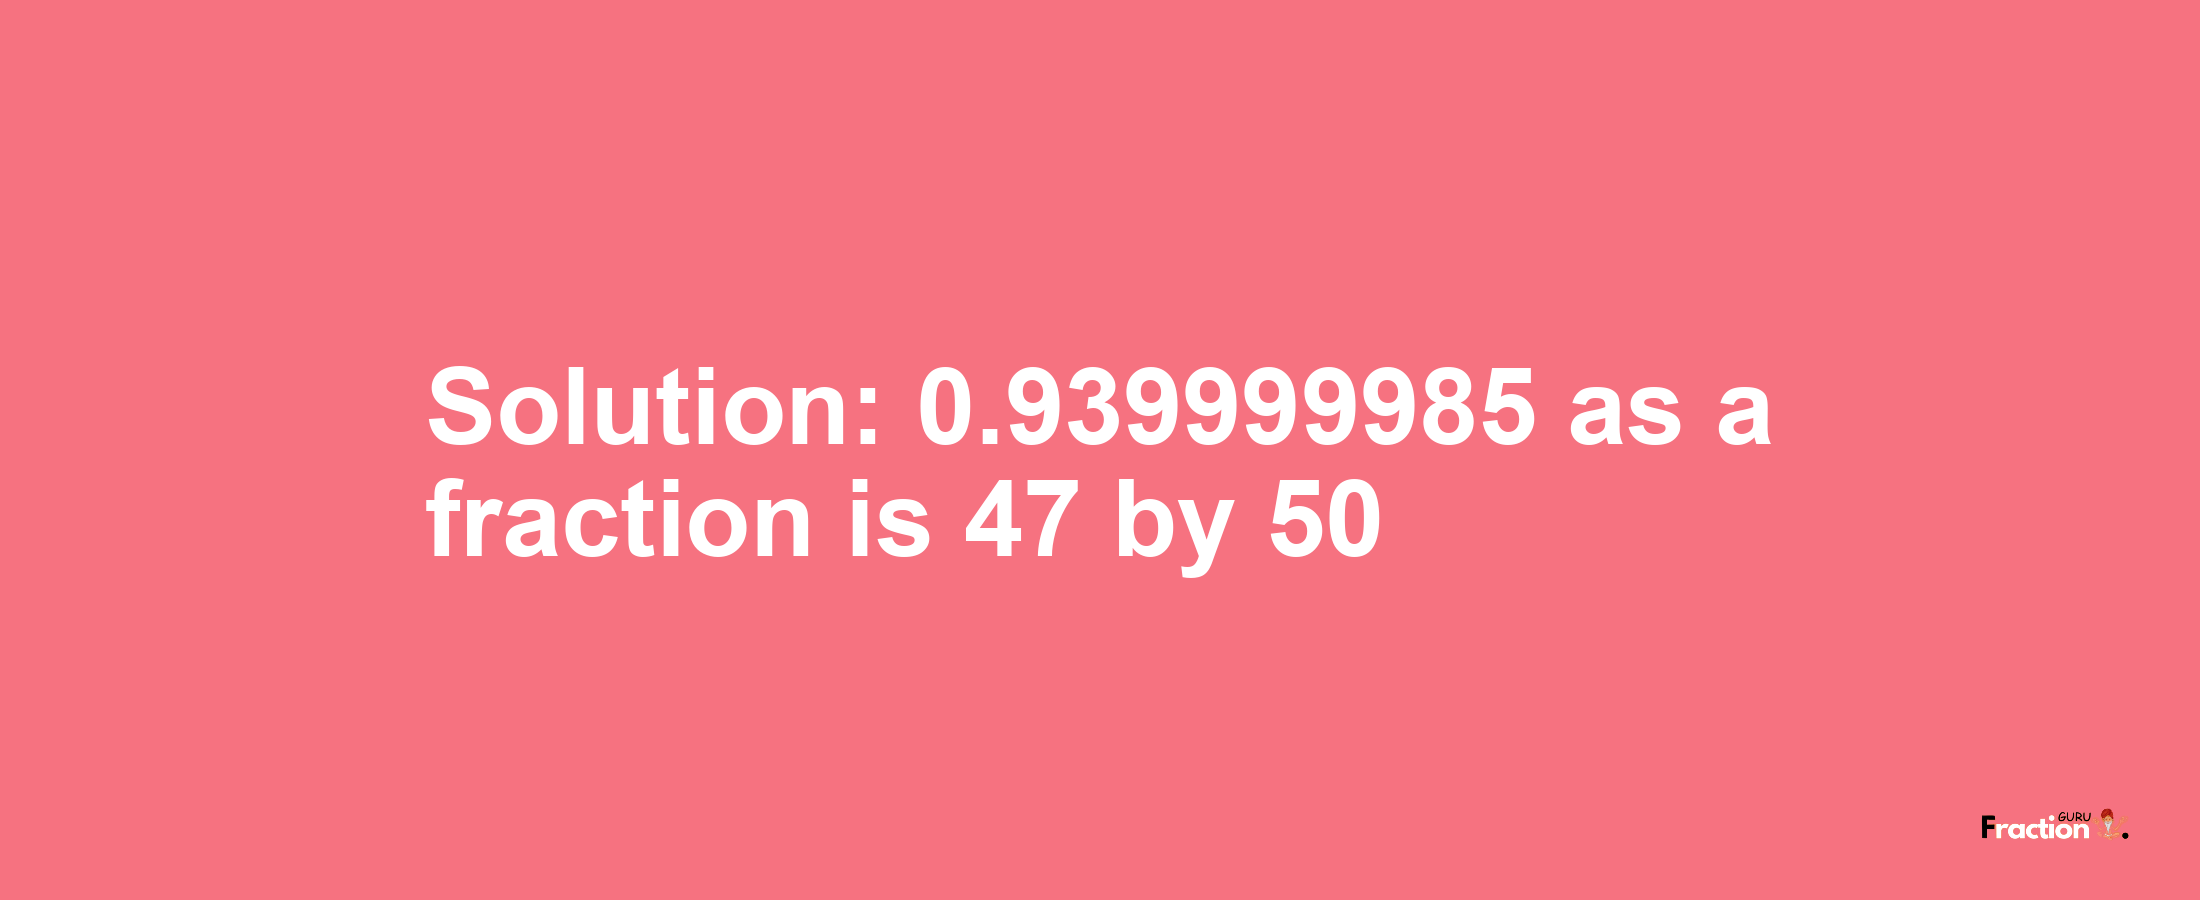 Solution:0.939999985 as a fraction is 47/50